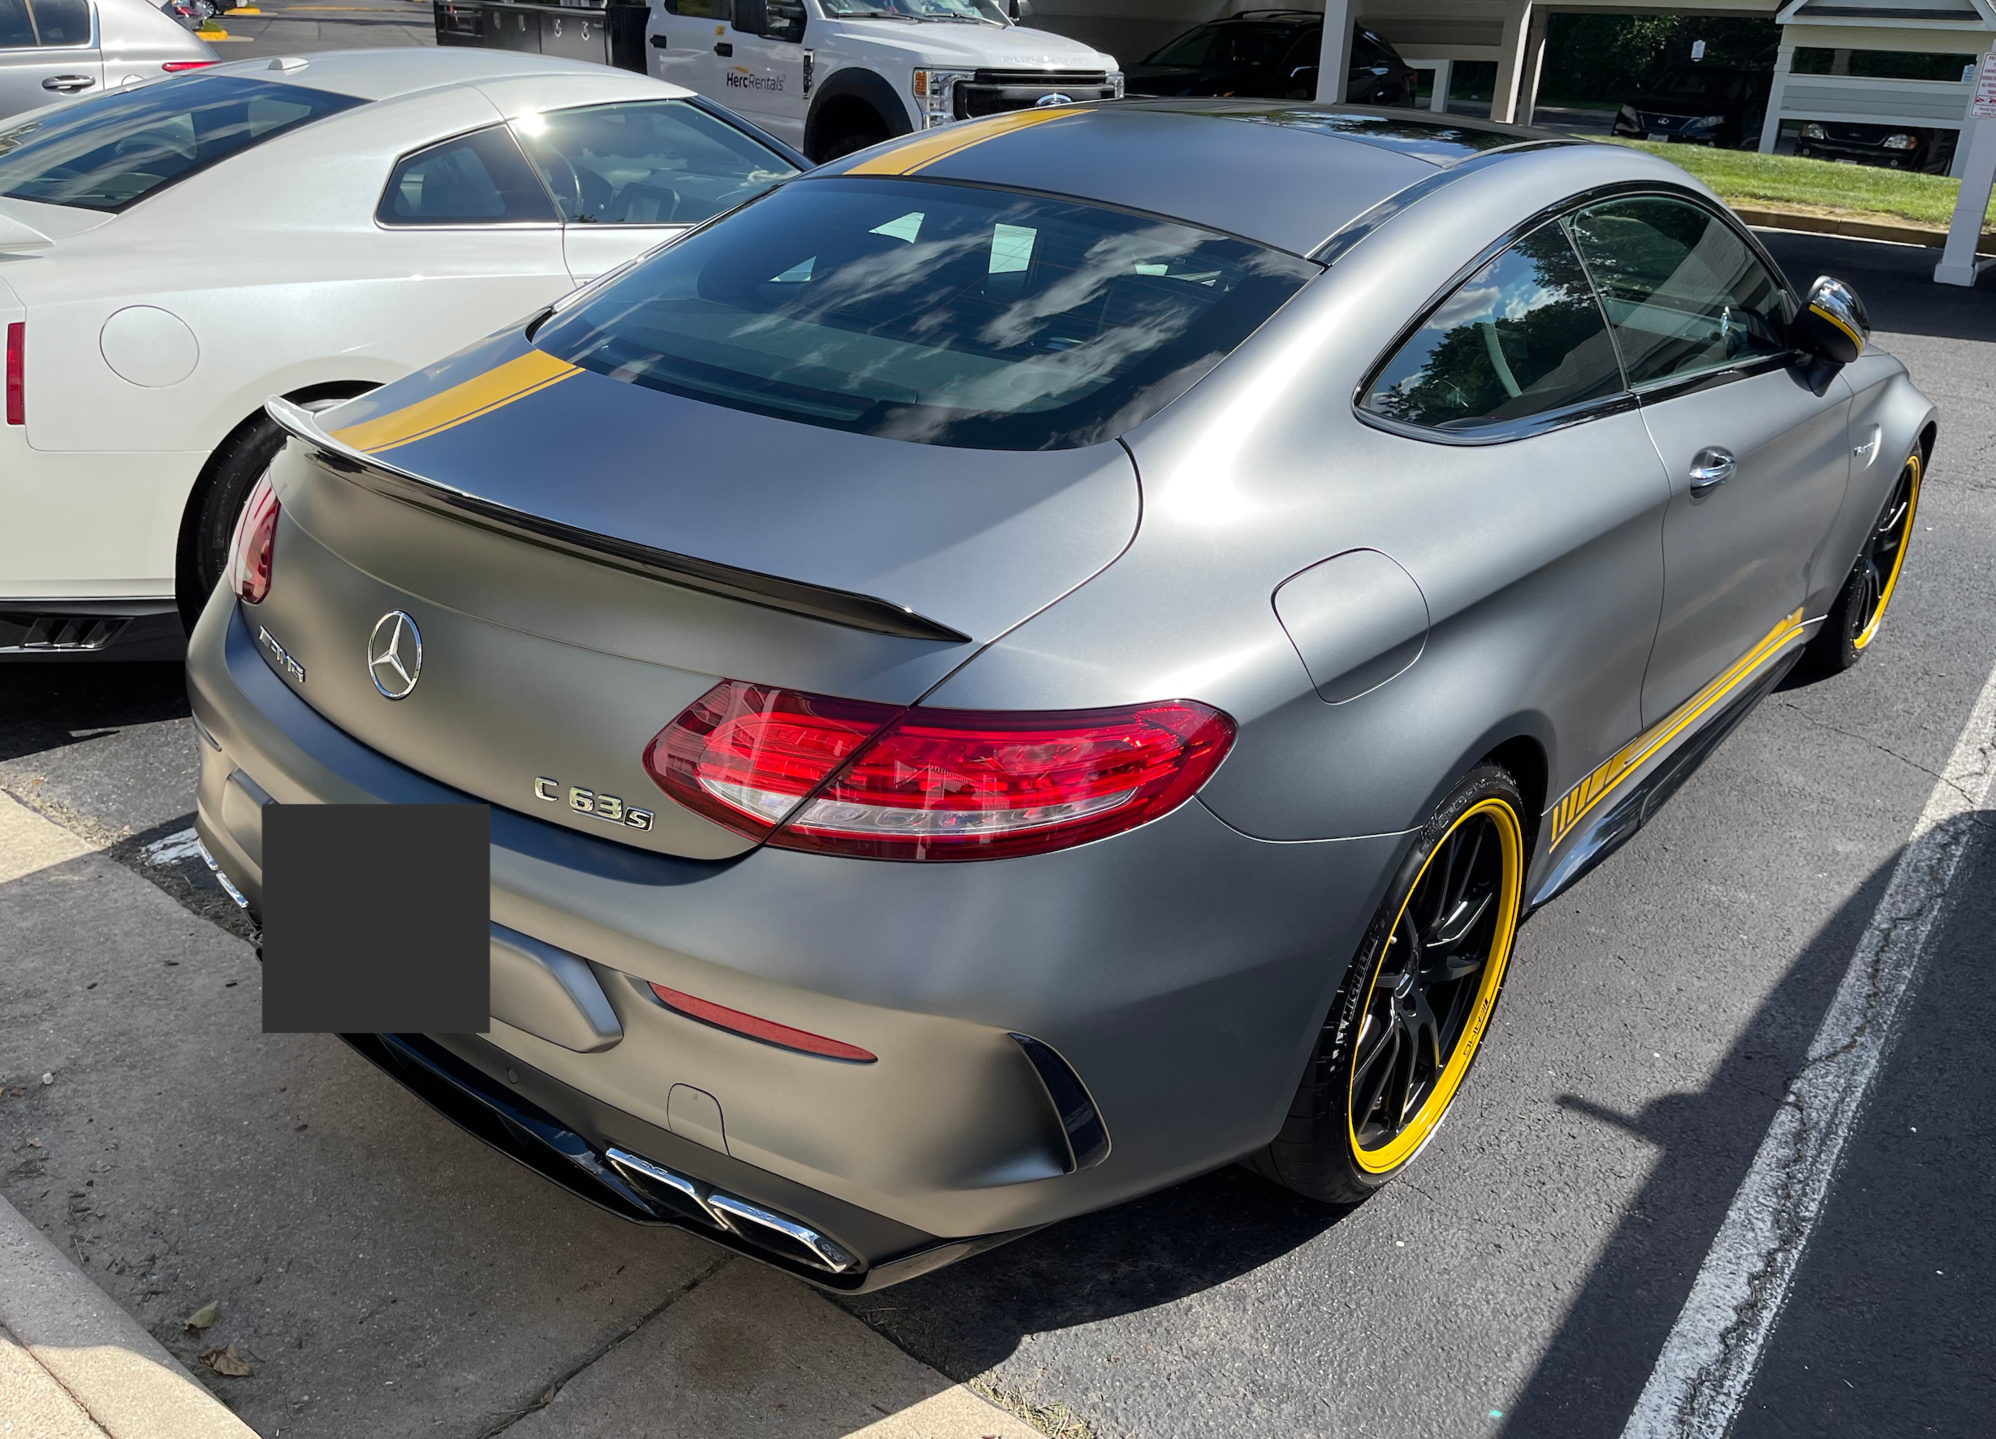 2017 Mercedes-Benz C63 AMG S - 2017 C63S AMG Coupe Edition 1 17k Miles Stock!! - Used - VIN WDDWJ8HB6HF439133 - 17,100 Miles - 8 cyl - 2WD - Automatic - Coupe - Gray - Springfield, VA 22150, United States